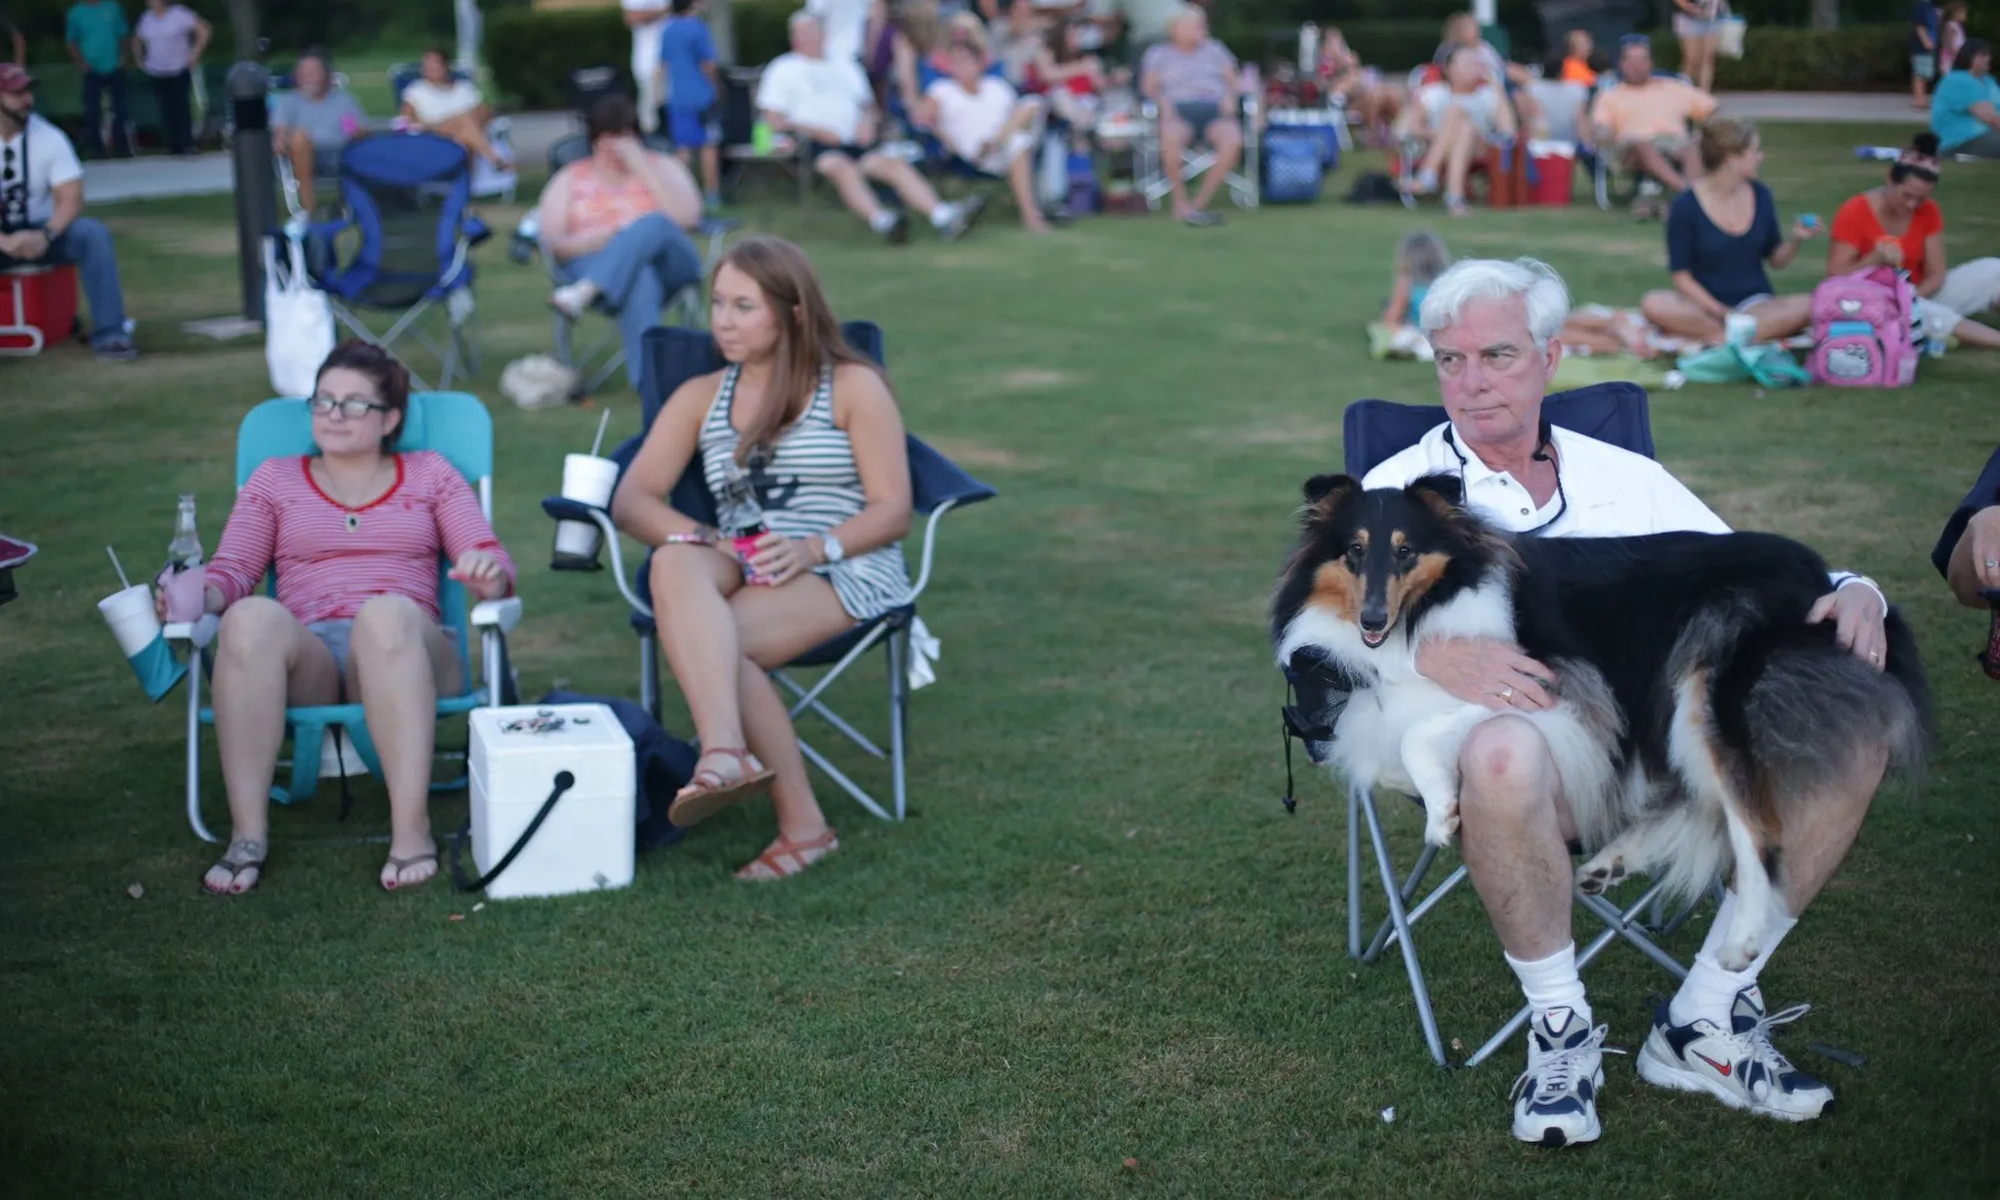 A dog sits on his owner's lap at an outdoor concert while two ladies look on